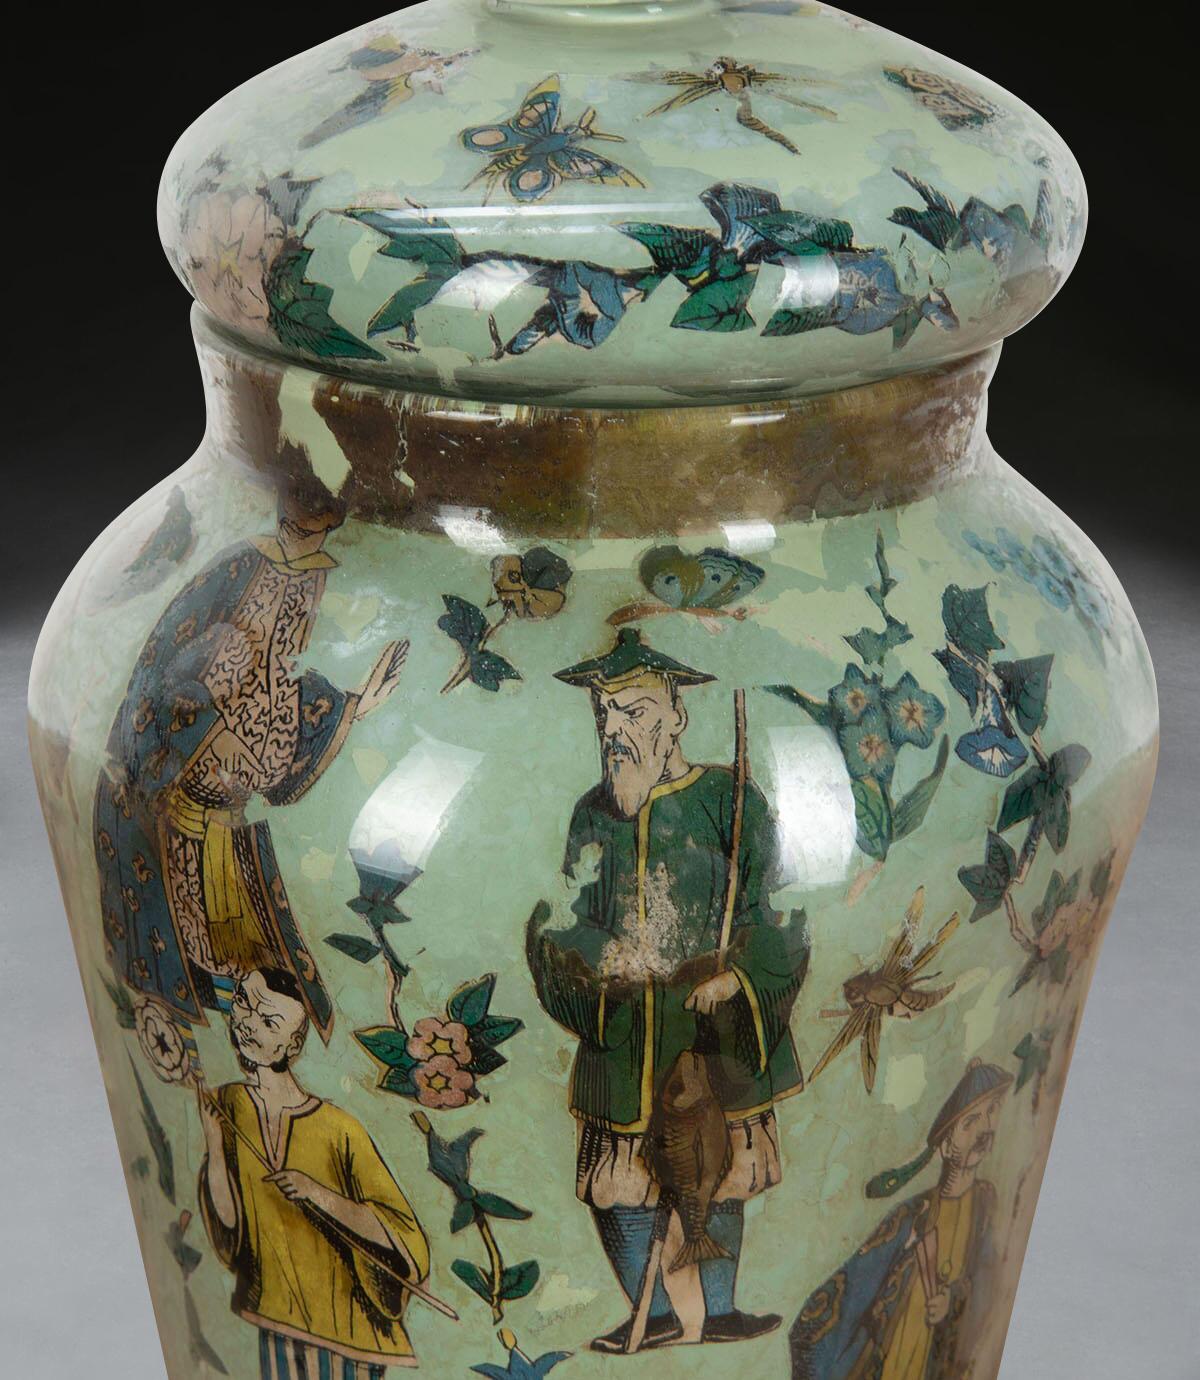 Regency Decalcomania Vase In Good Condition For Sale In Shipston-On-Stour, GB